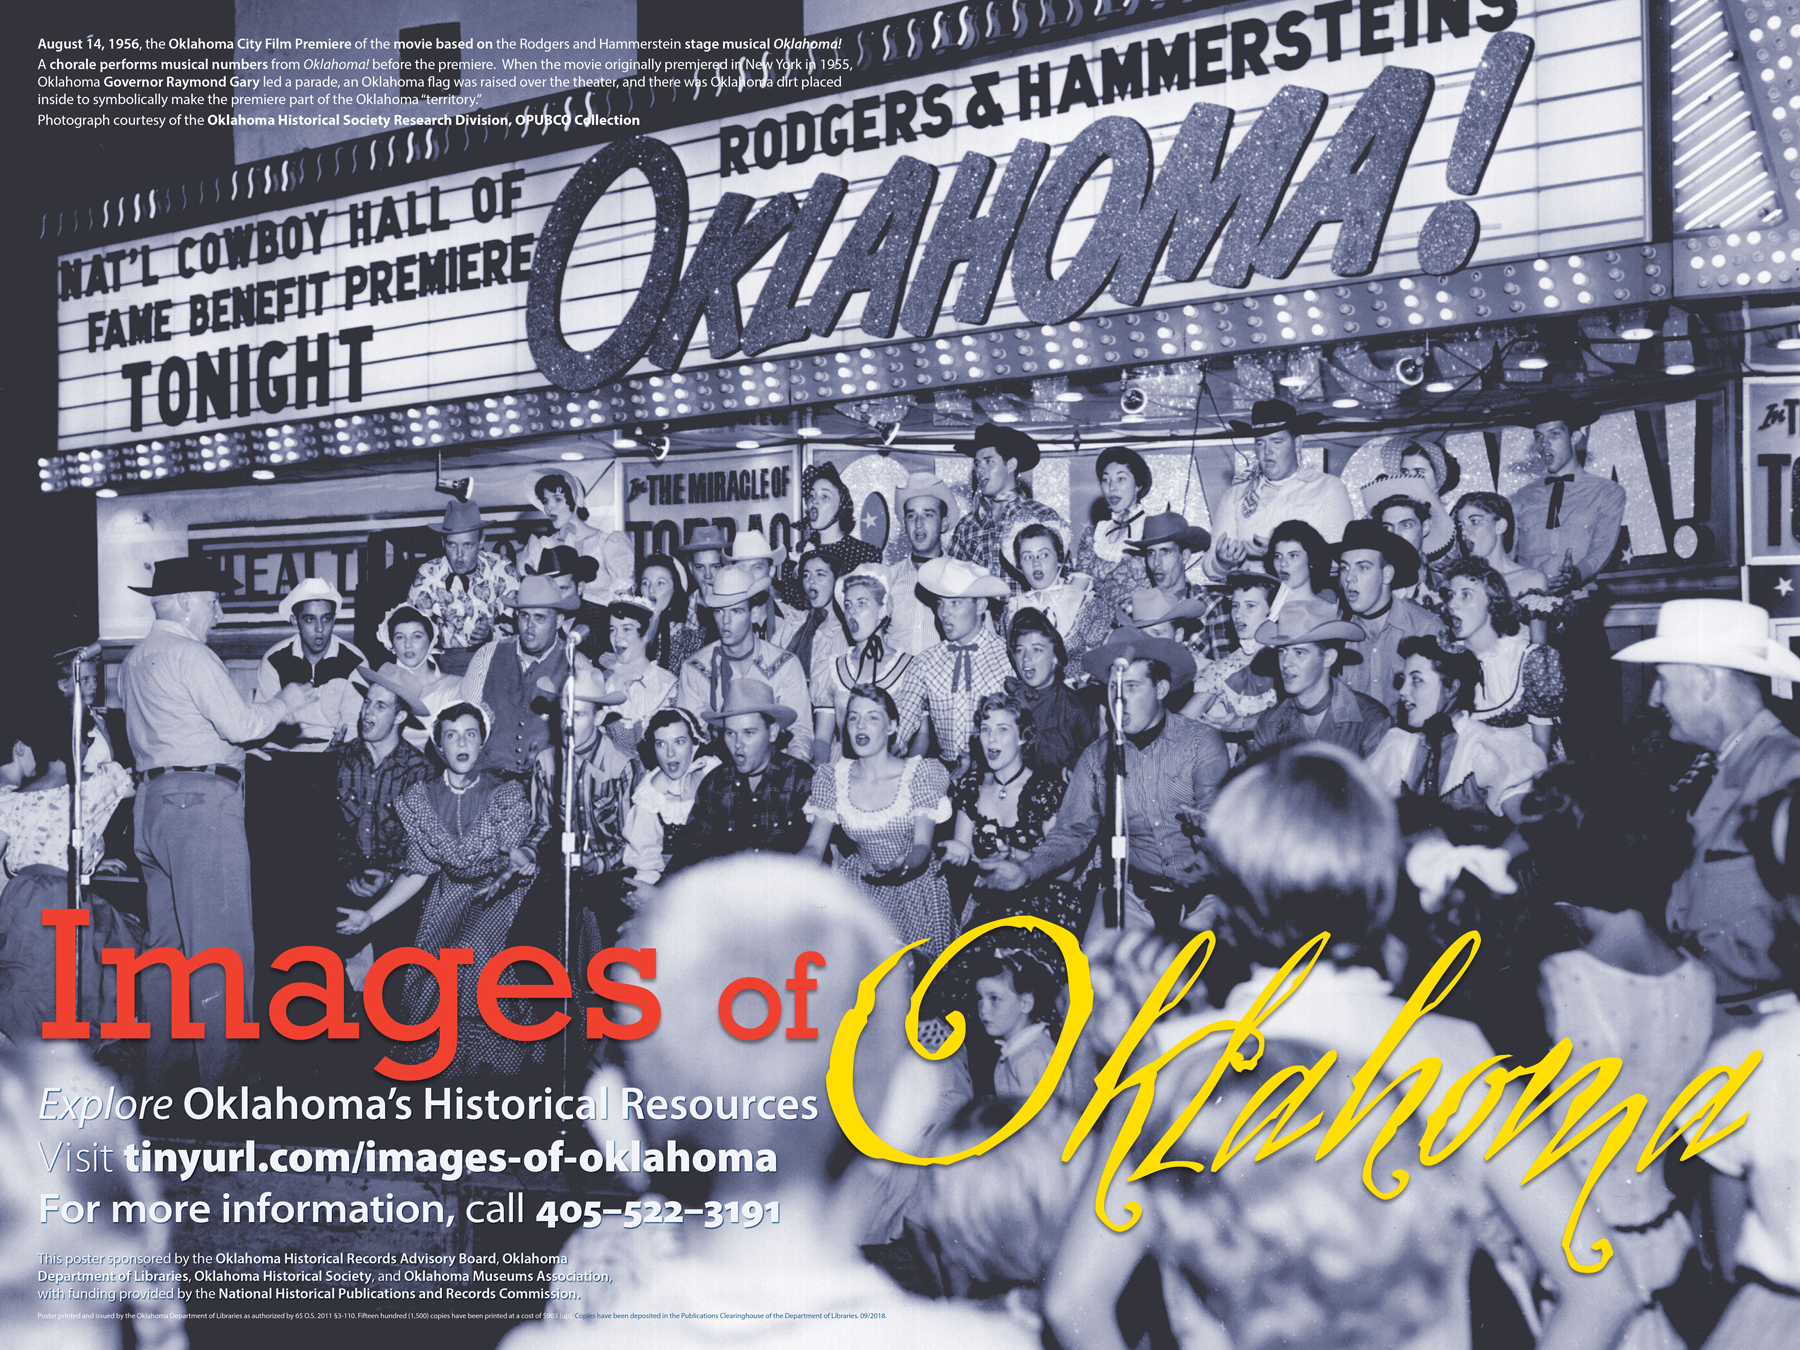 A chorale performing songs from Oklahoma! at the Oklahoma City premiere of the film in 1956.